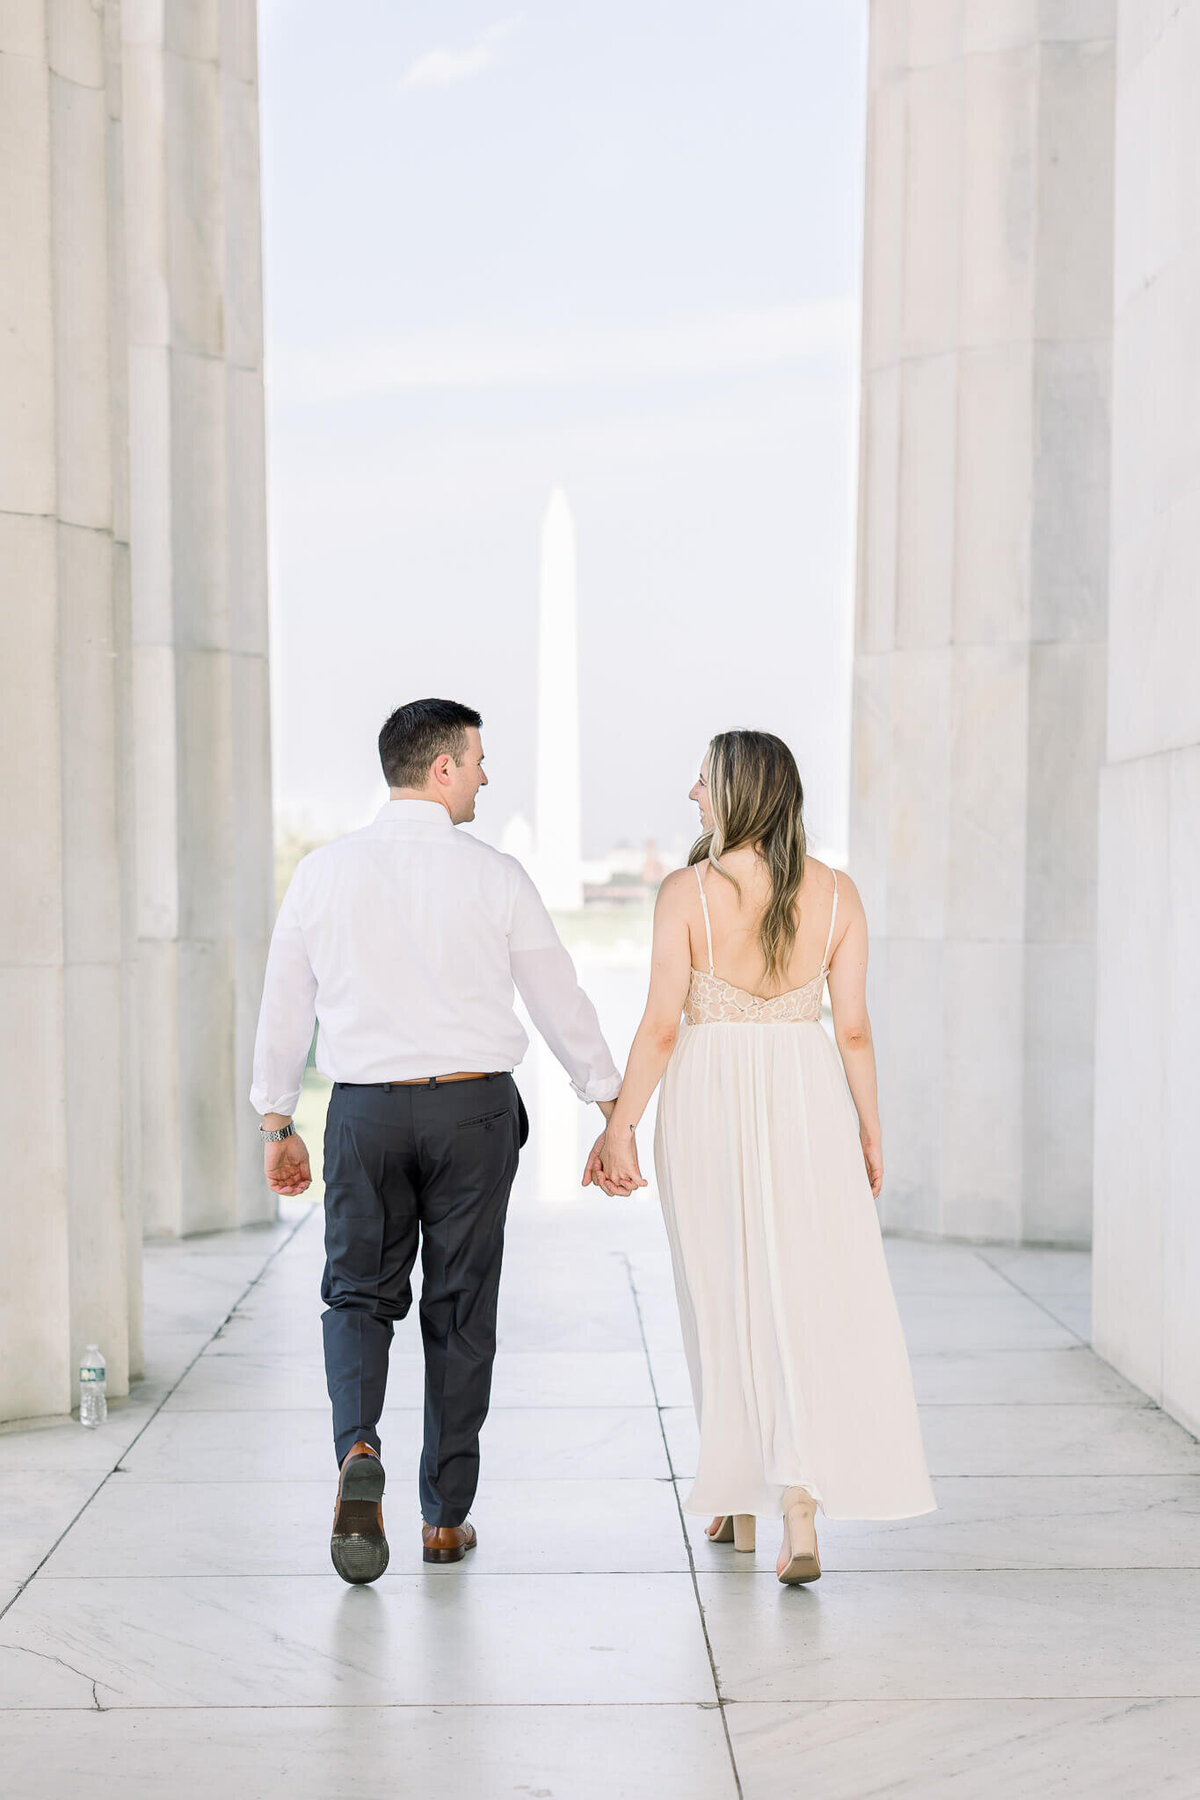 engagement-lincoln-memorial-proposal-photography-washington-DC-virginia-maryland-modern-light-and-airy-classic-timeless-romantic-14